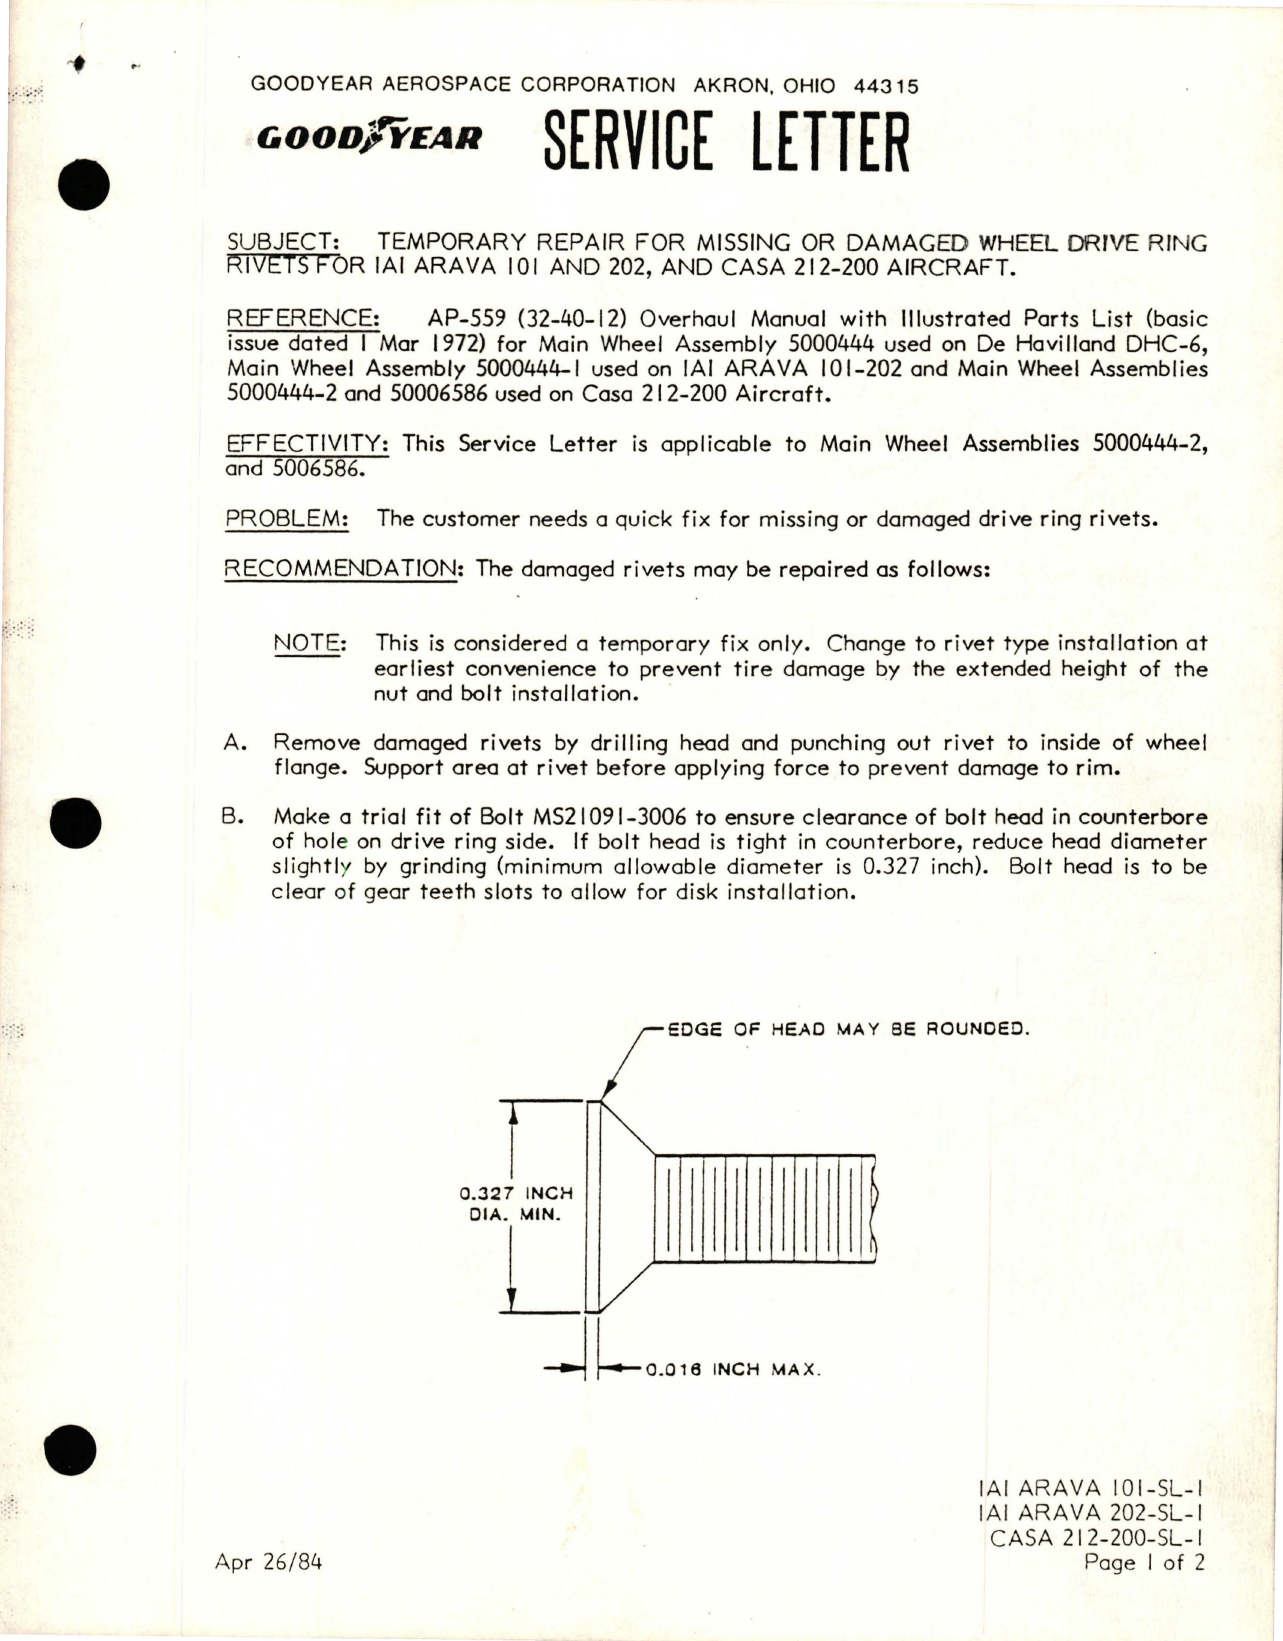 Sample page 1 from AirCorps Library document: Temporary Repair for Missing or Damaged Wheel Drive Ring Rivets for 1A1 ARVIA 101 and 102, and CASA 212-200 